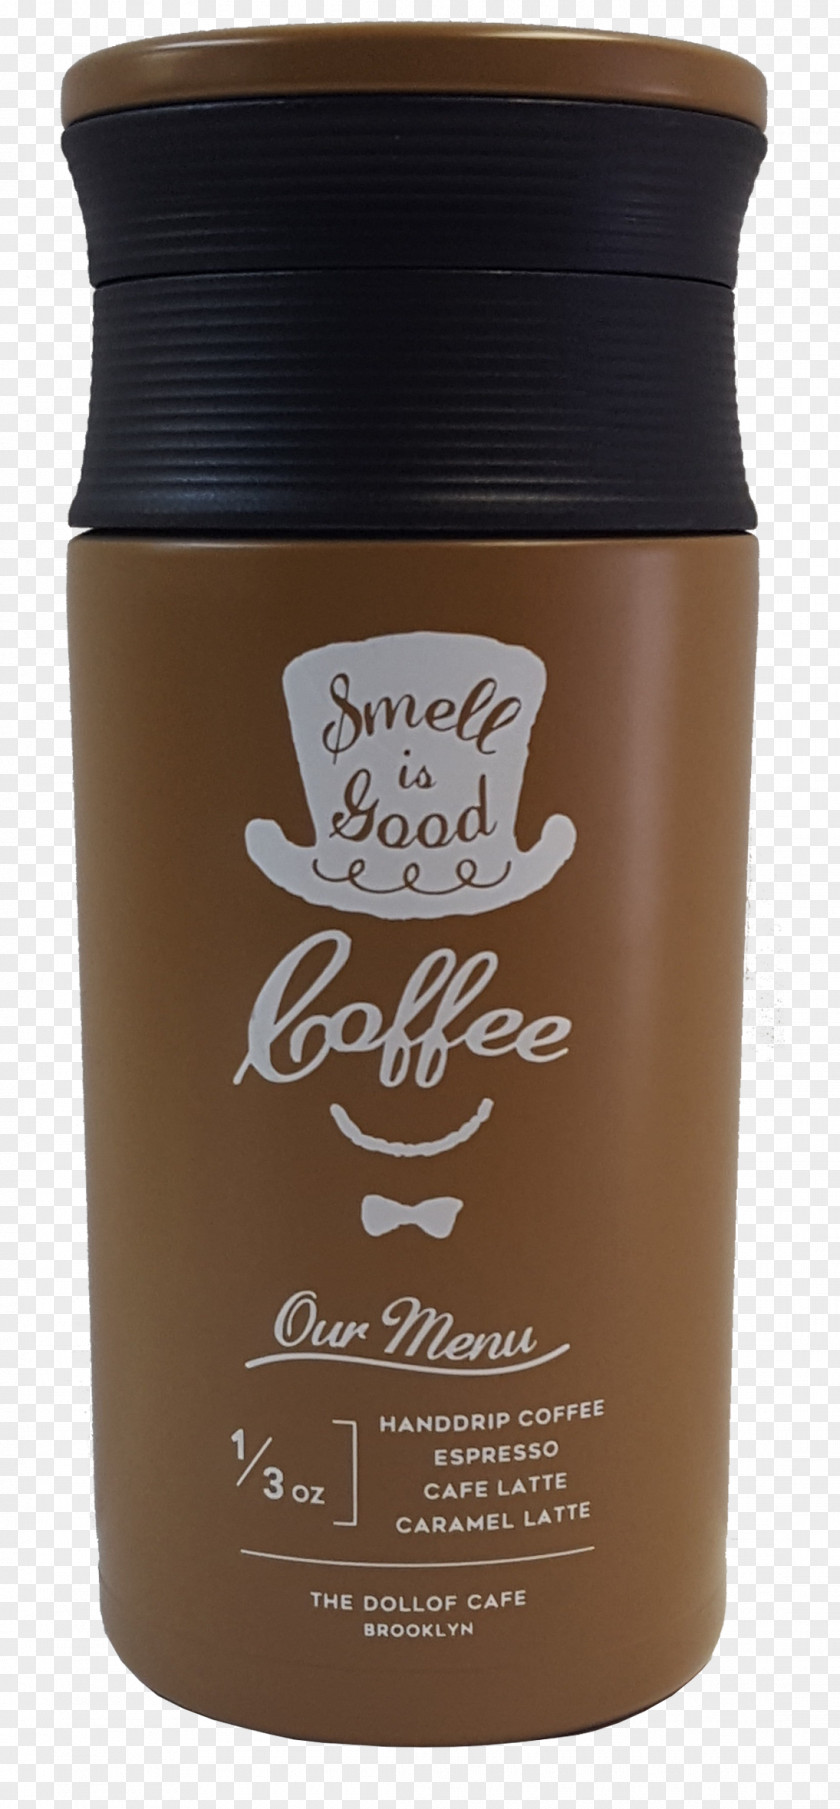 Good Smell Cafe Milk Coffee Bottle Stainless Steel PNG